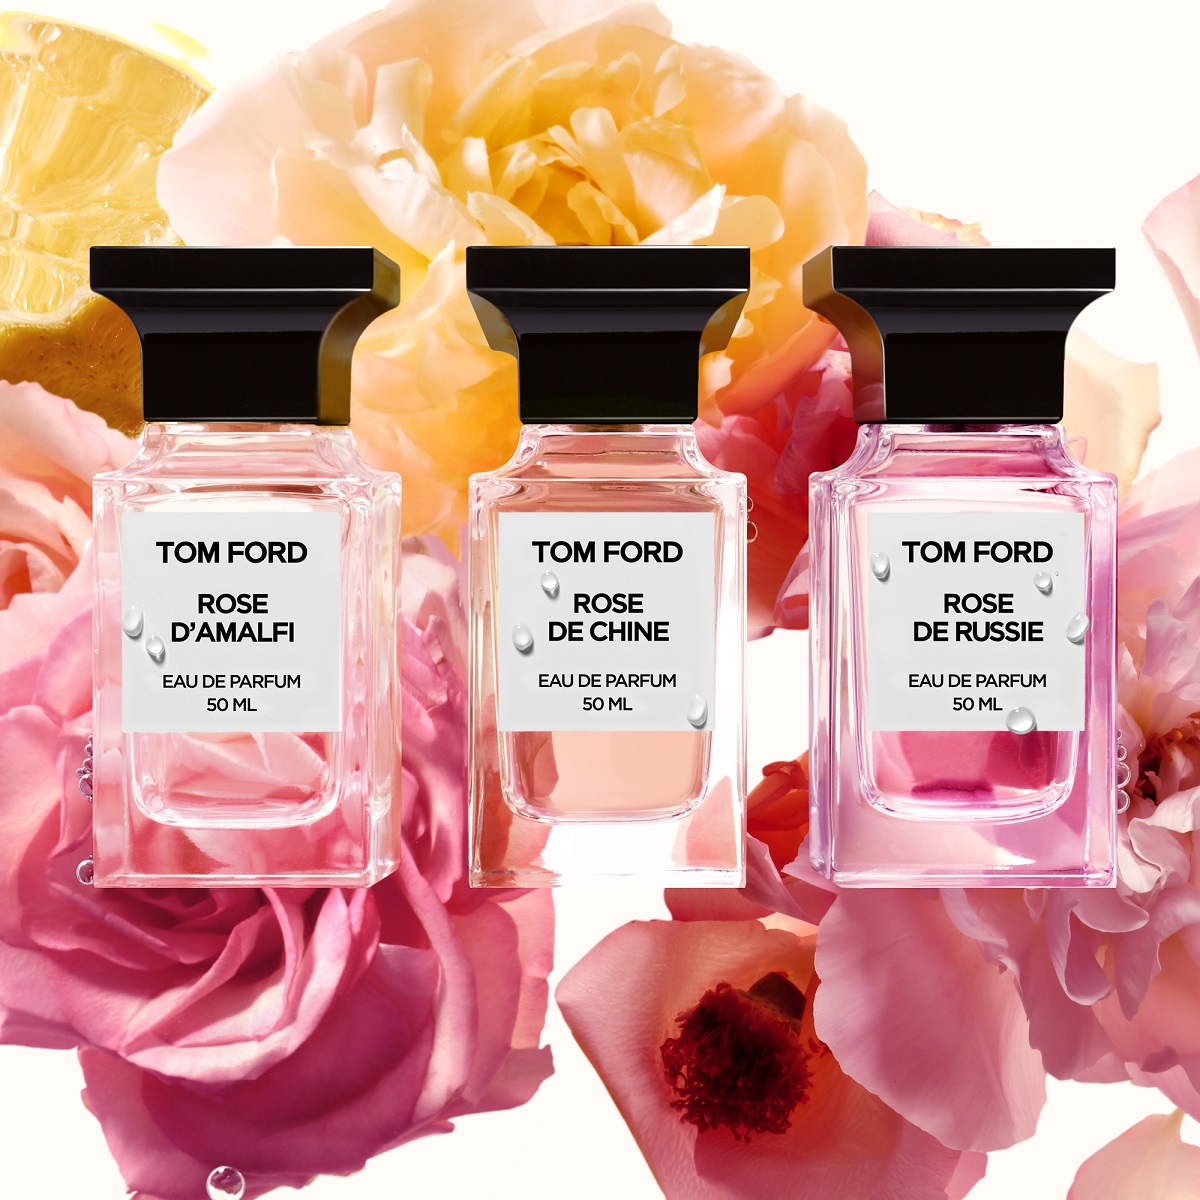 TOM FORD PRIVATE ROSE GARDEN INITIAL THOUGHTS